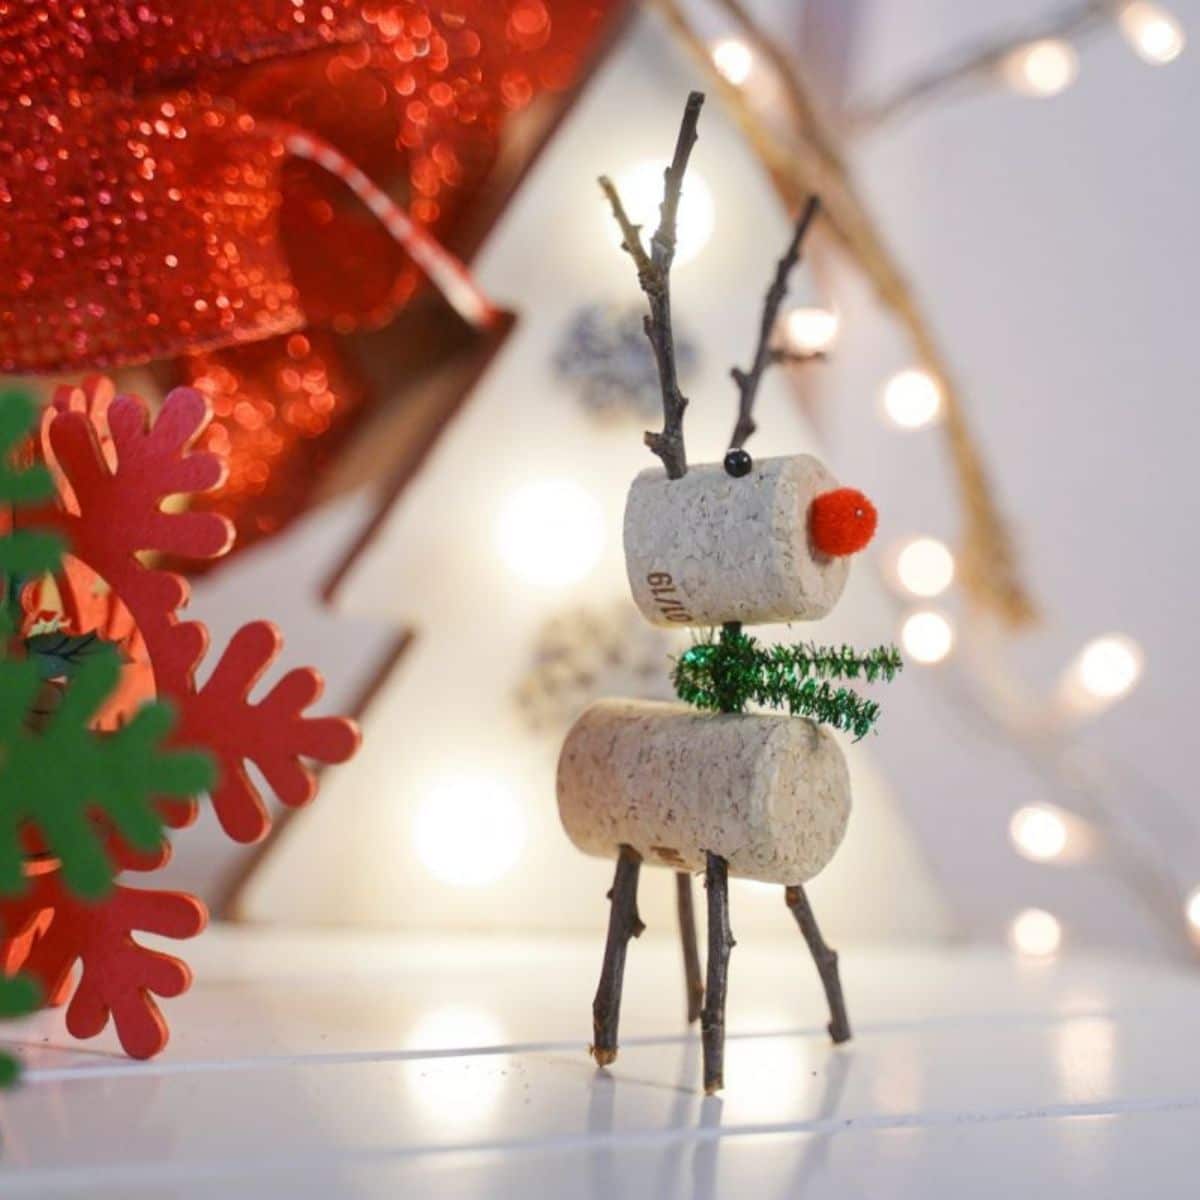 wine cork reindeer with green pipe cleaner scarf on the table by red ribbon